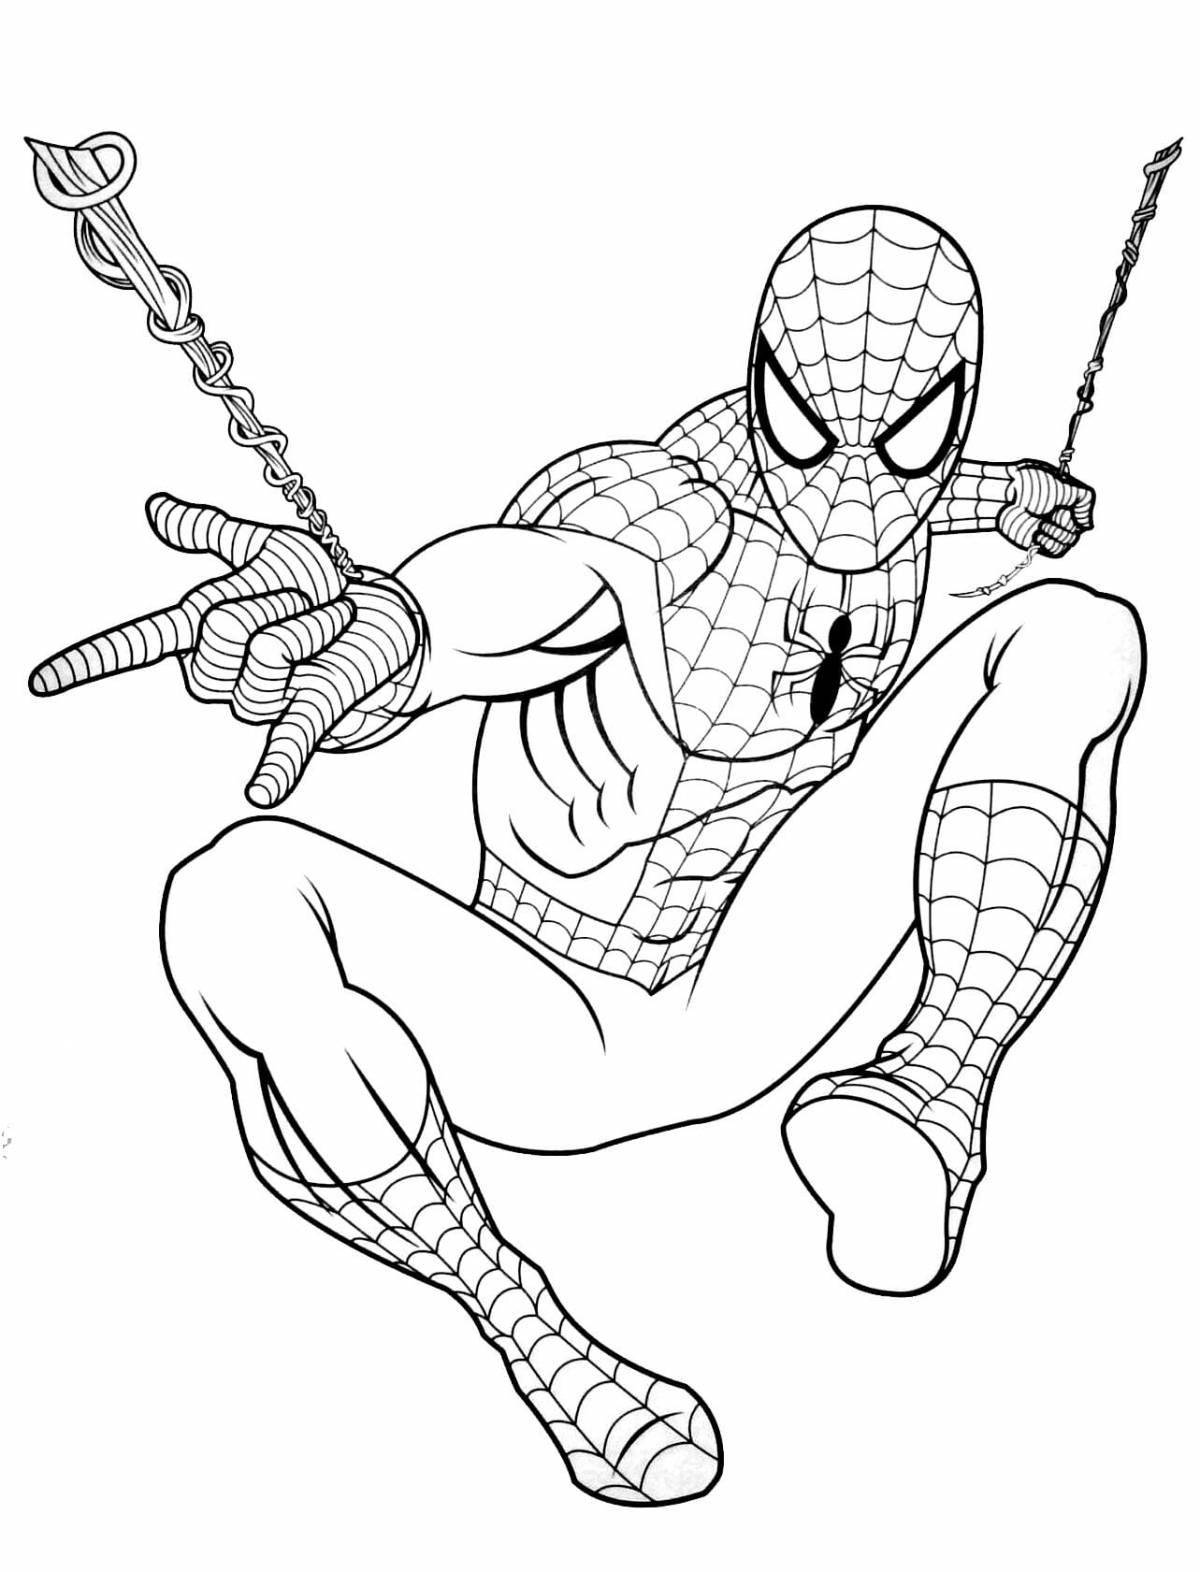 Spider-man evil shining coloring book